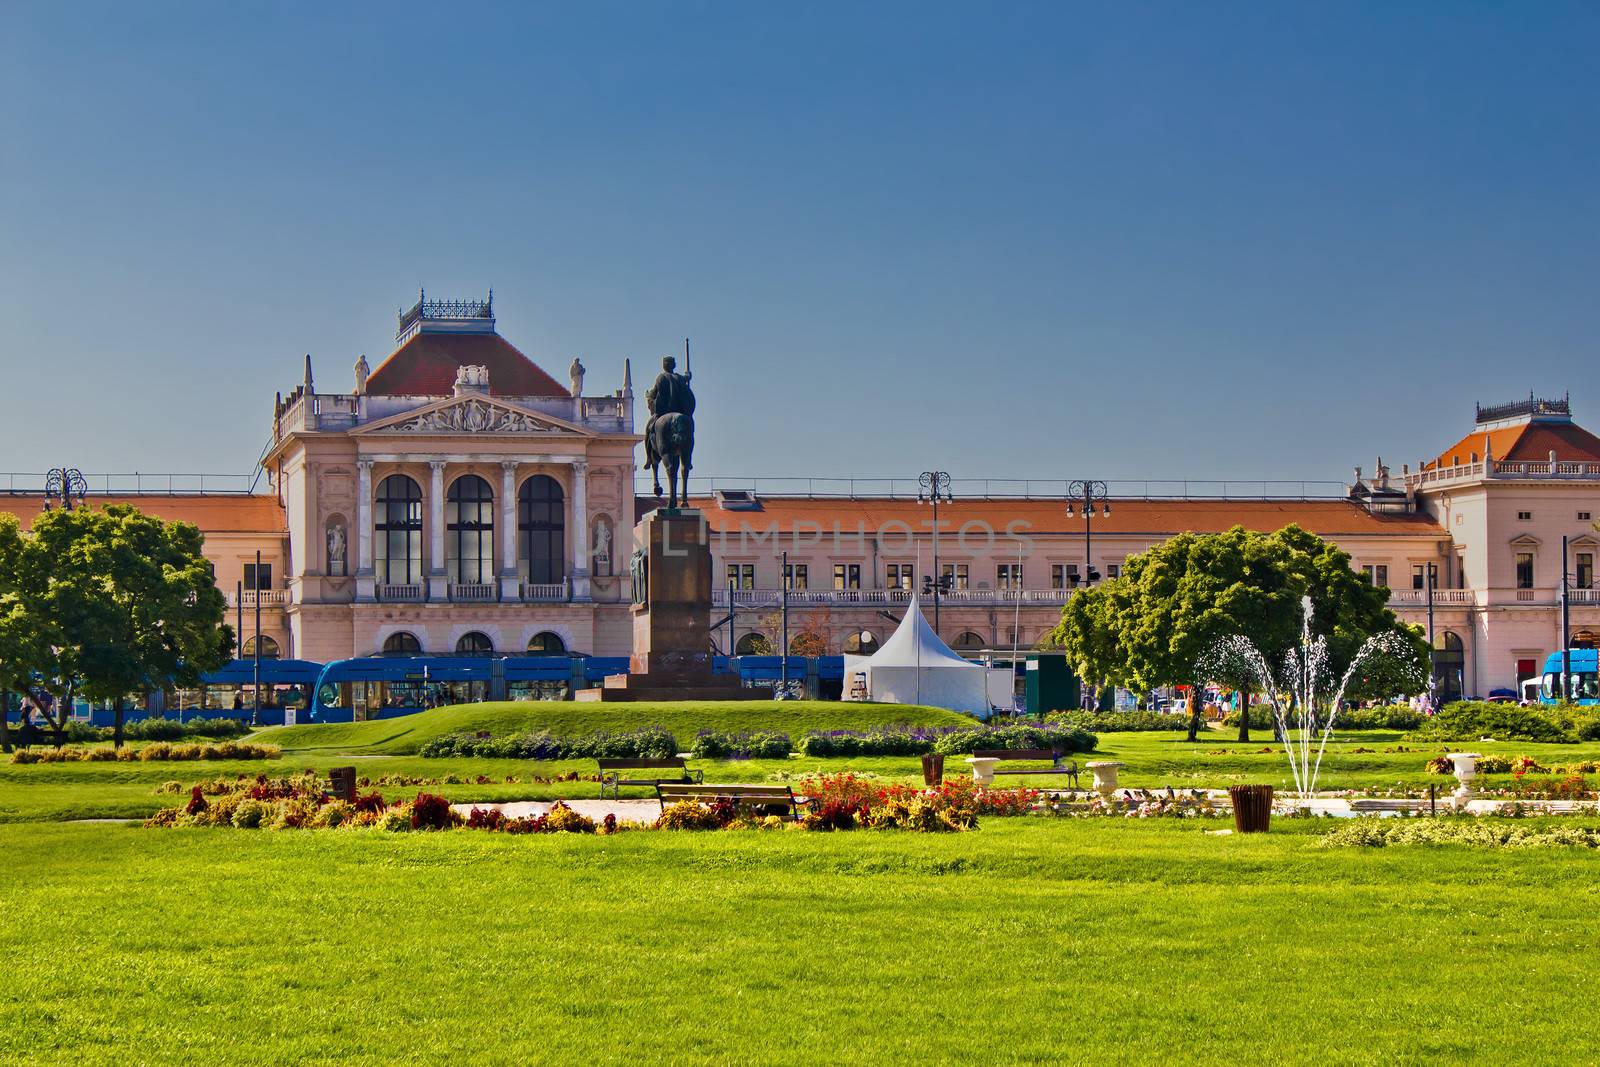 Zagreb central railway station and Tomislav square park